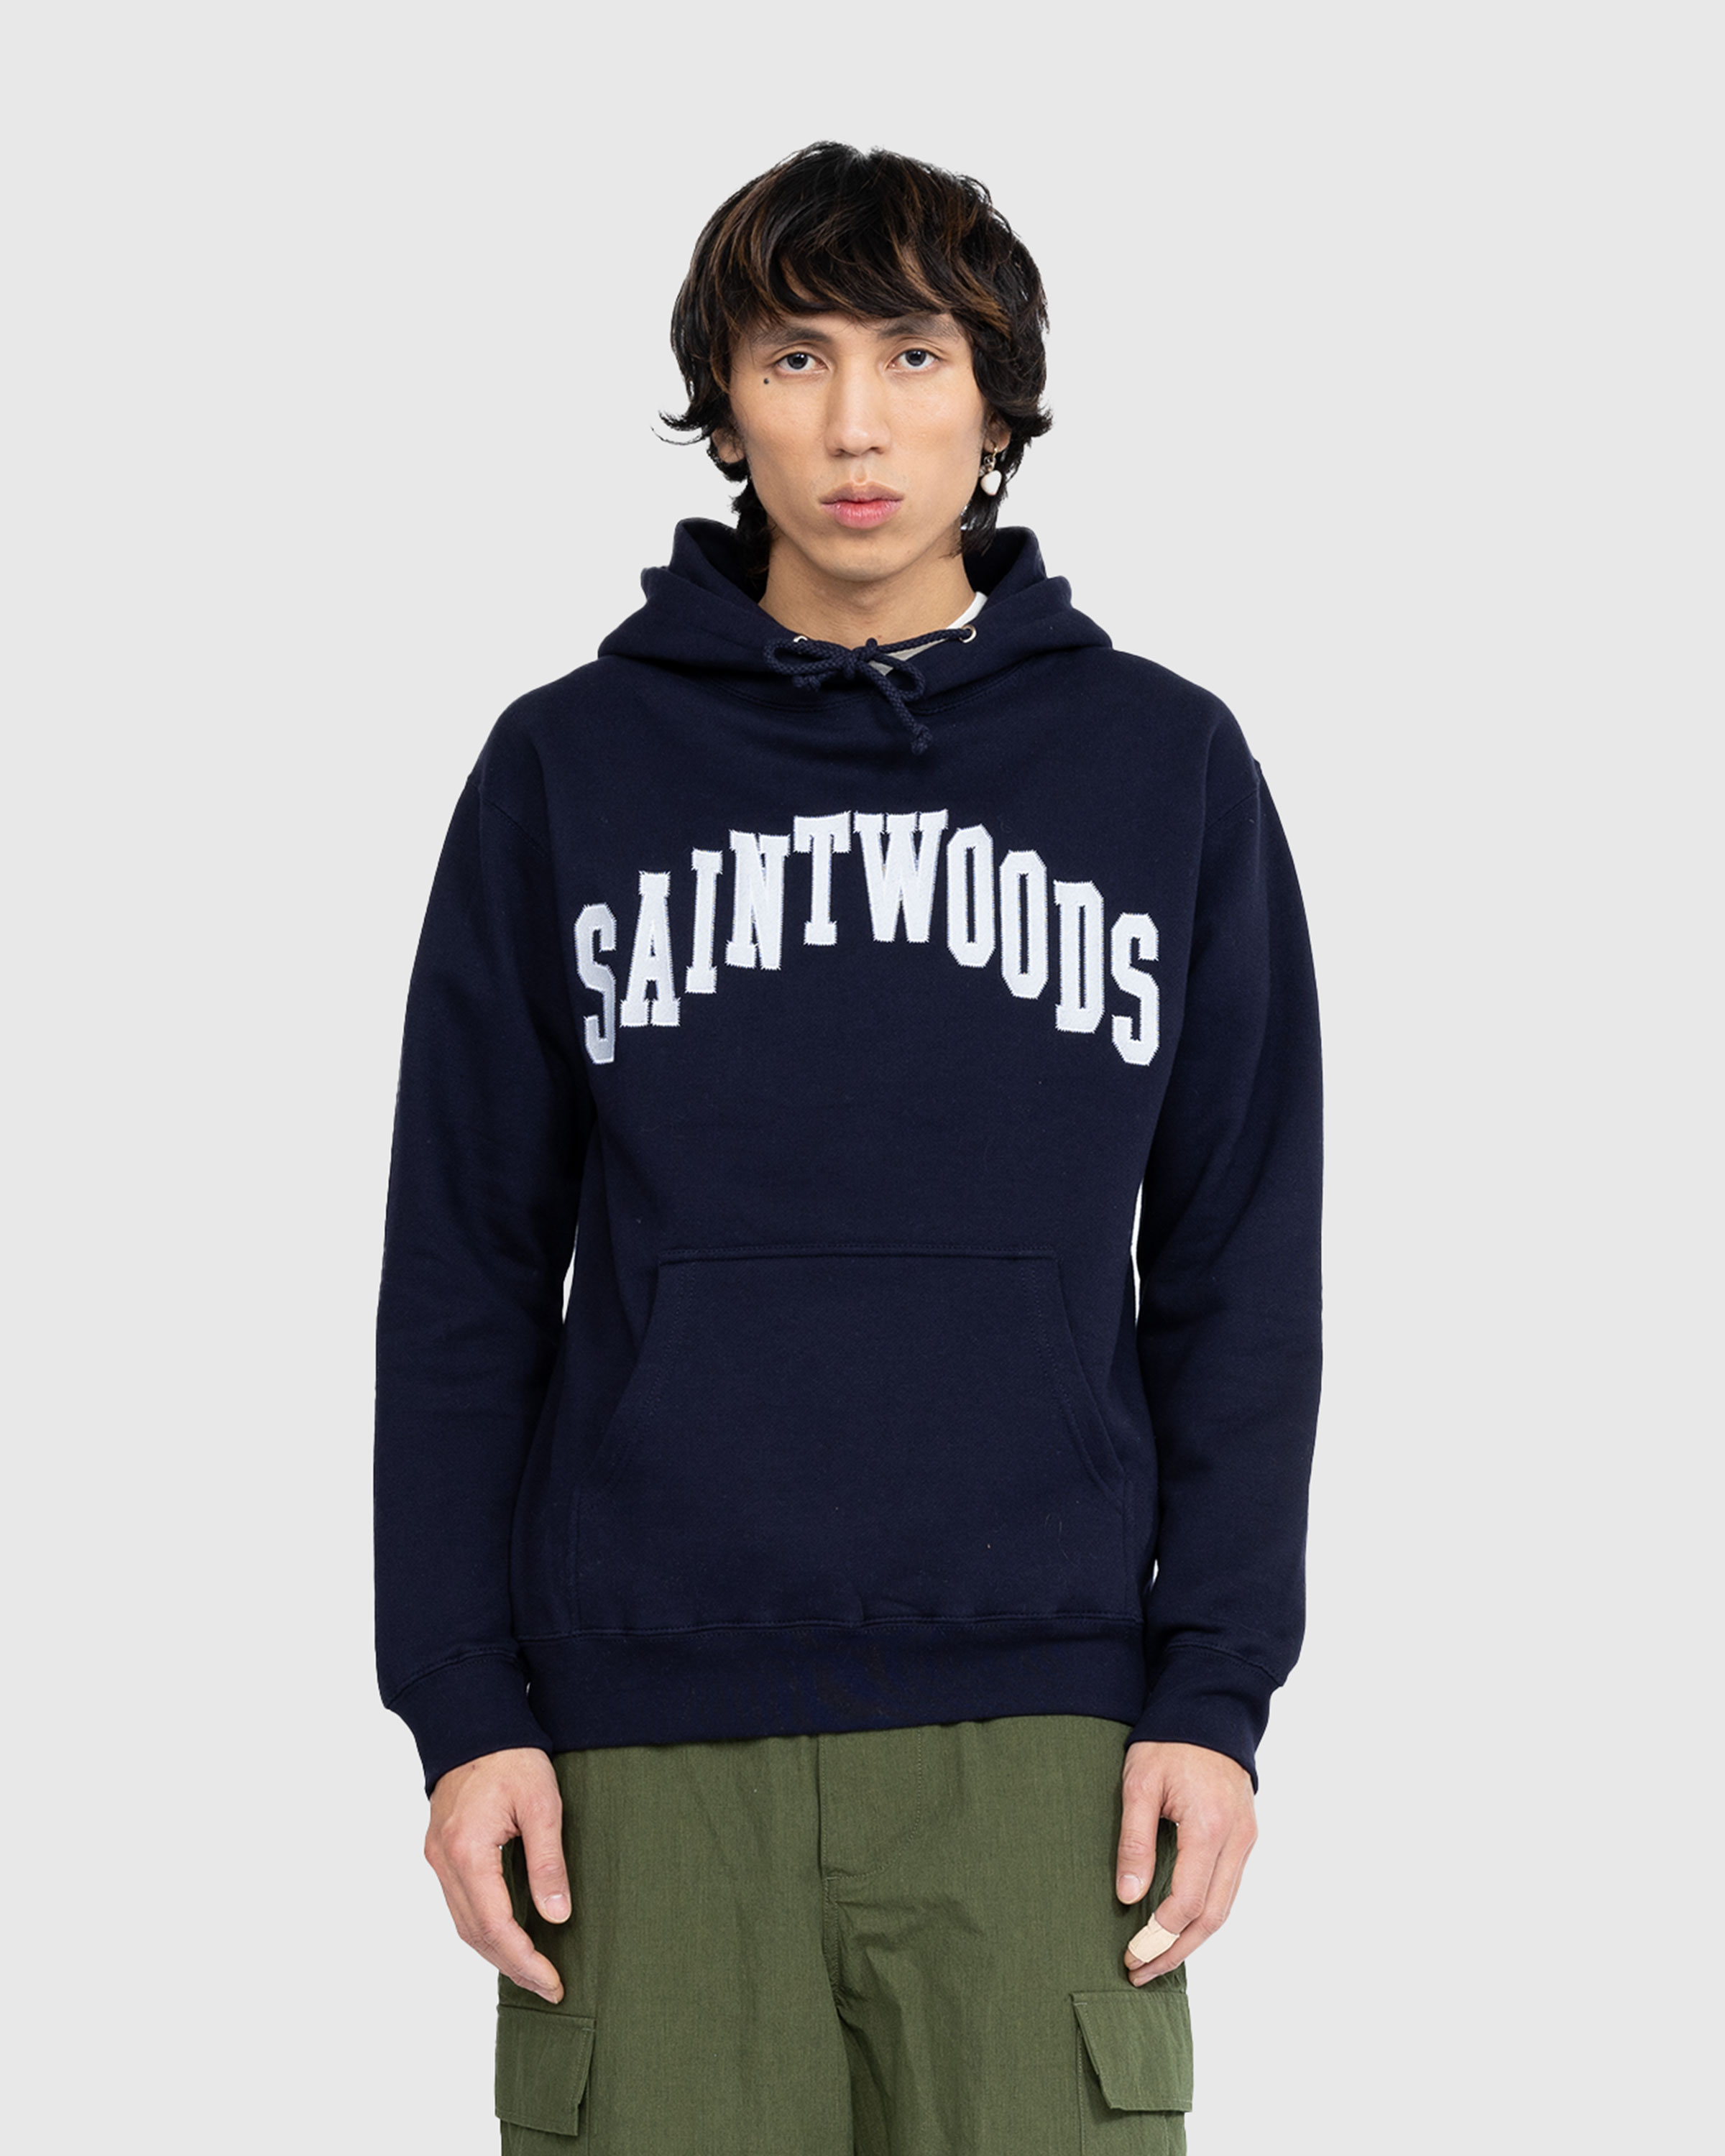 Saintwoods - Arch Hoodie Navy - Clothing - Blue - Image 2